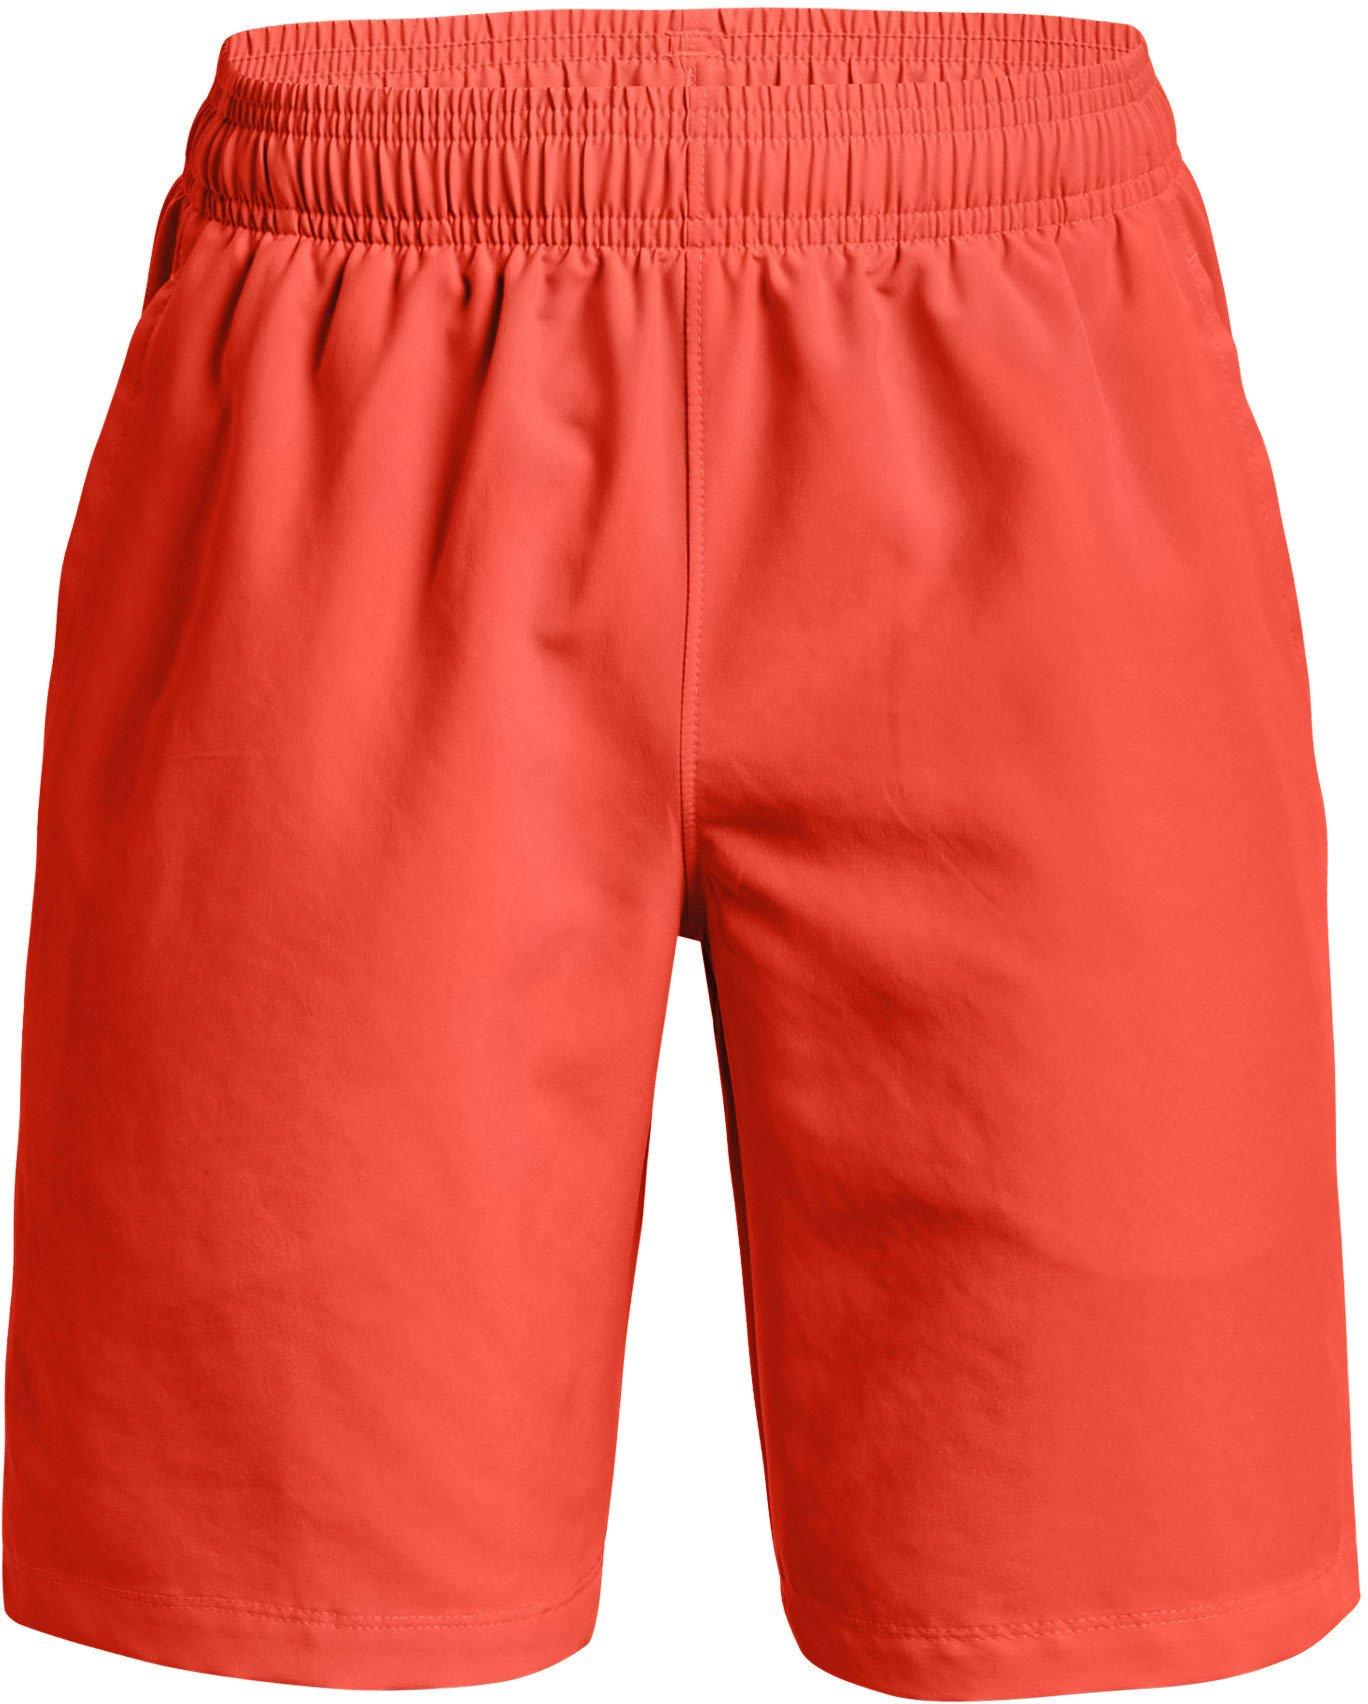 Under Armour Woven Graphic Shorts-ORG S